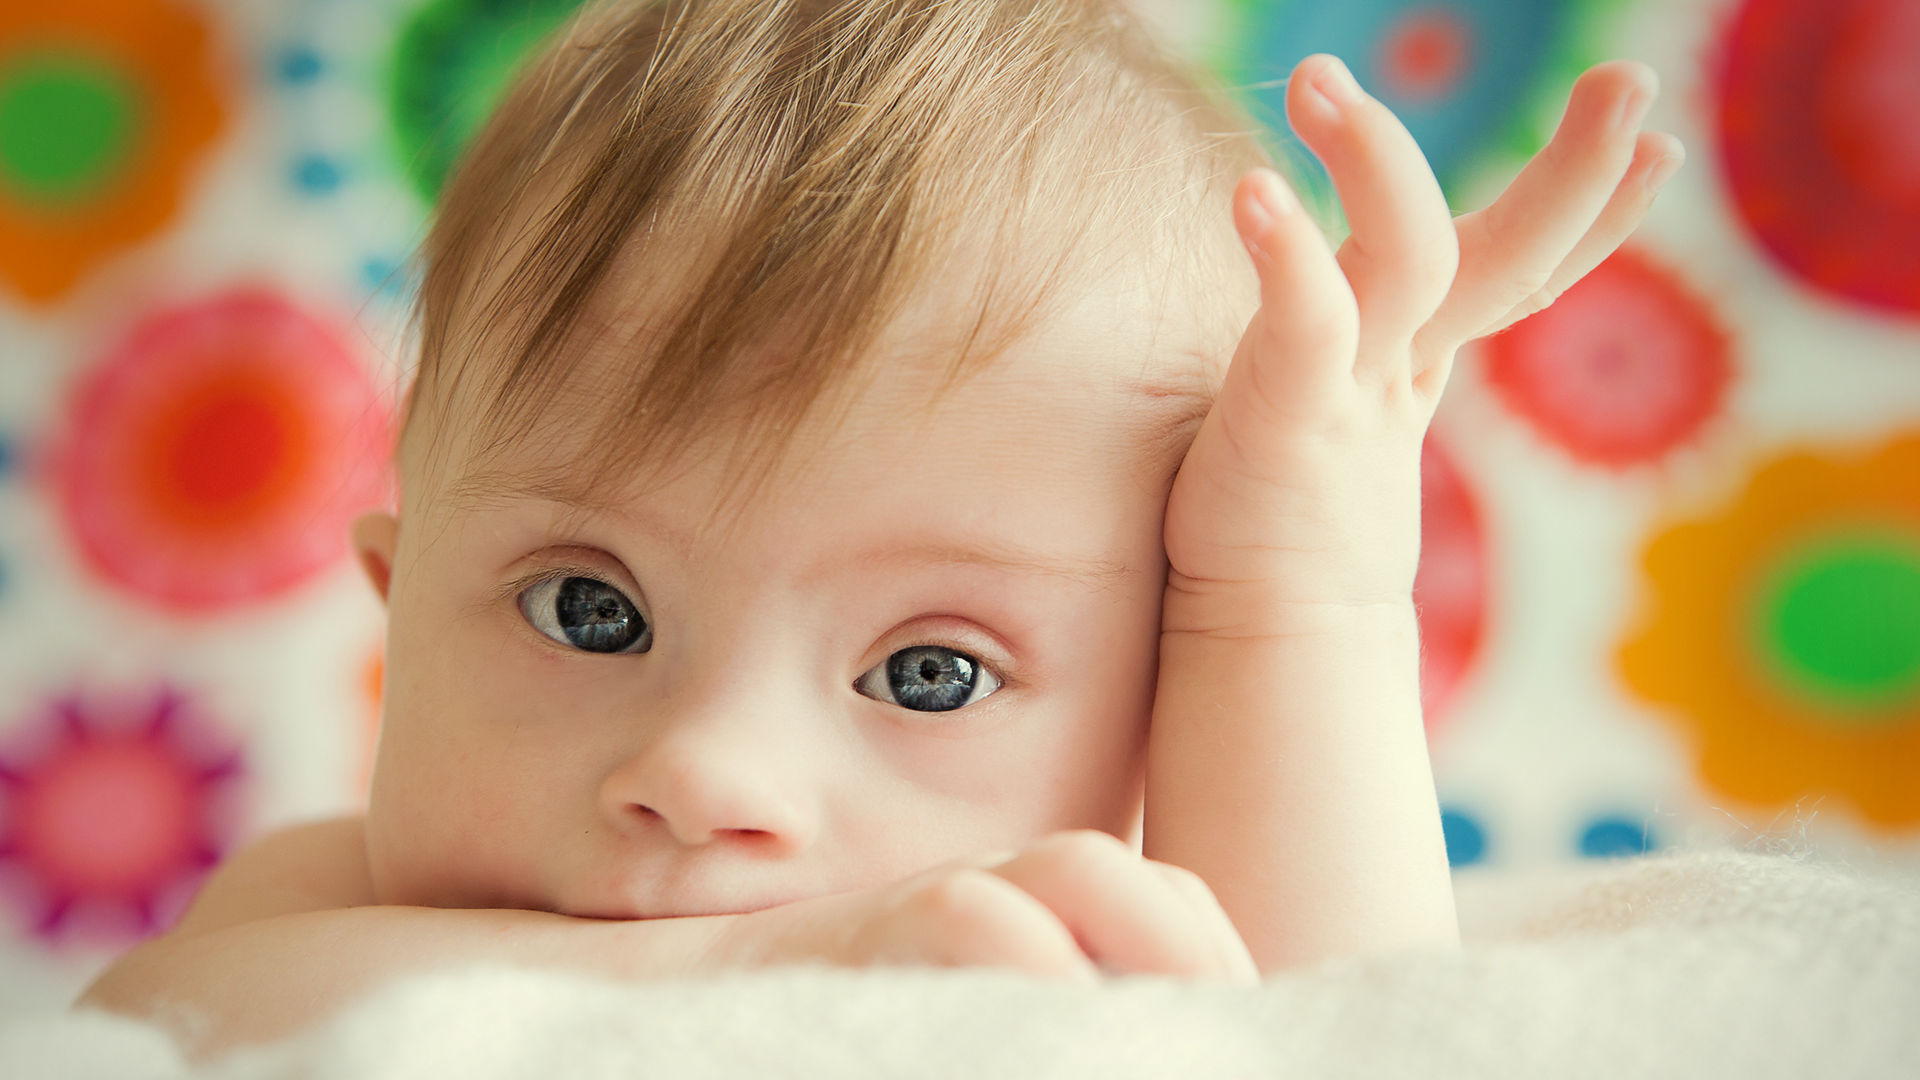 Young baby with colorful background